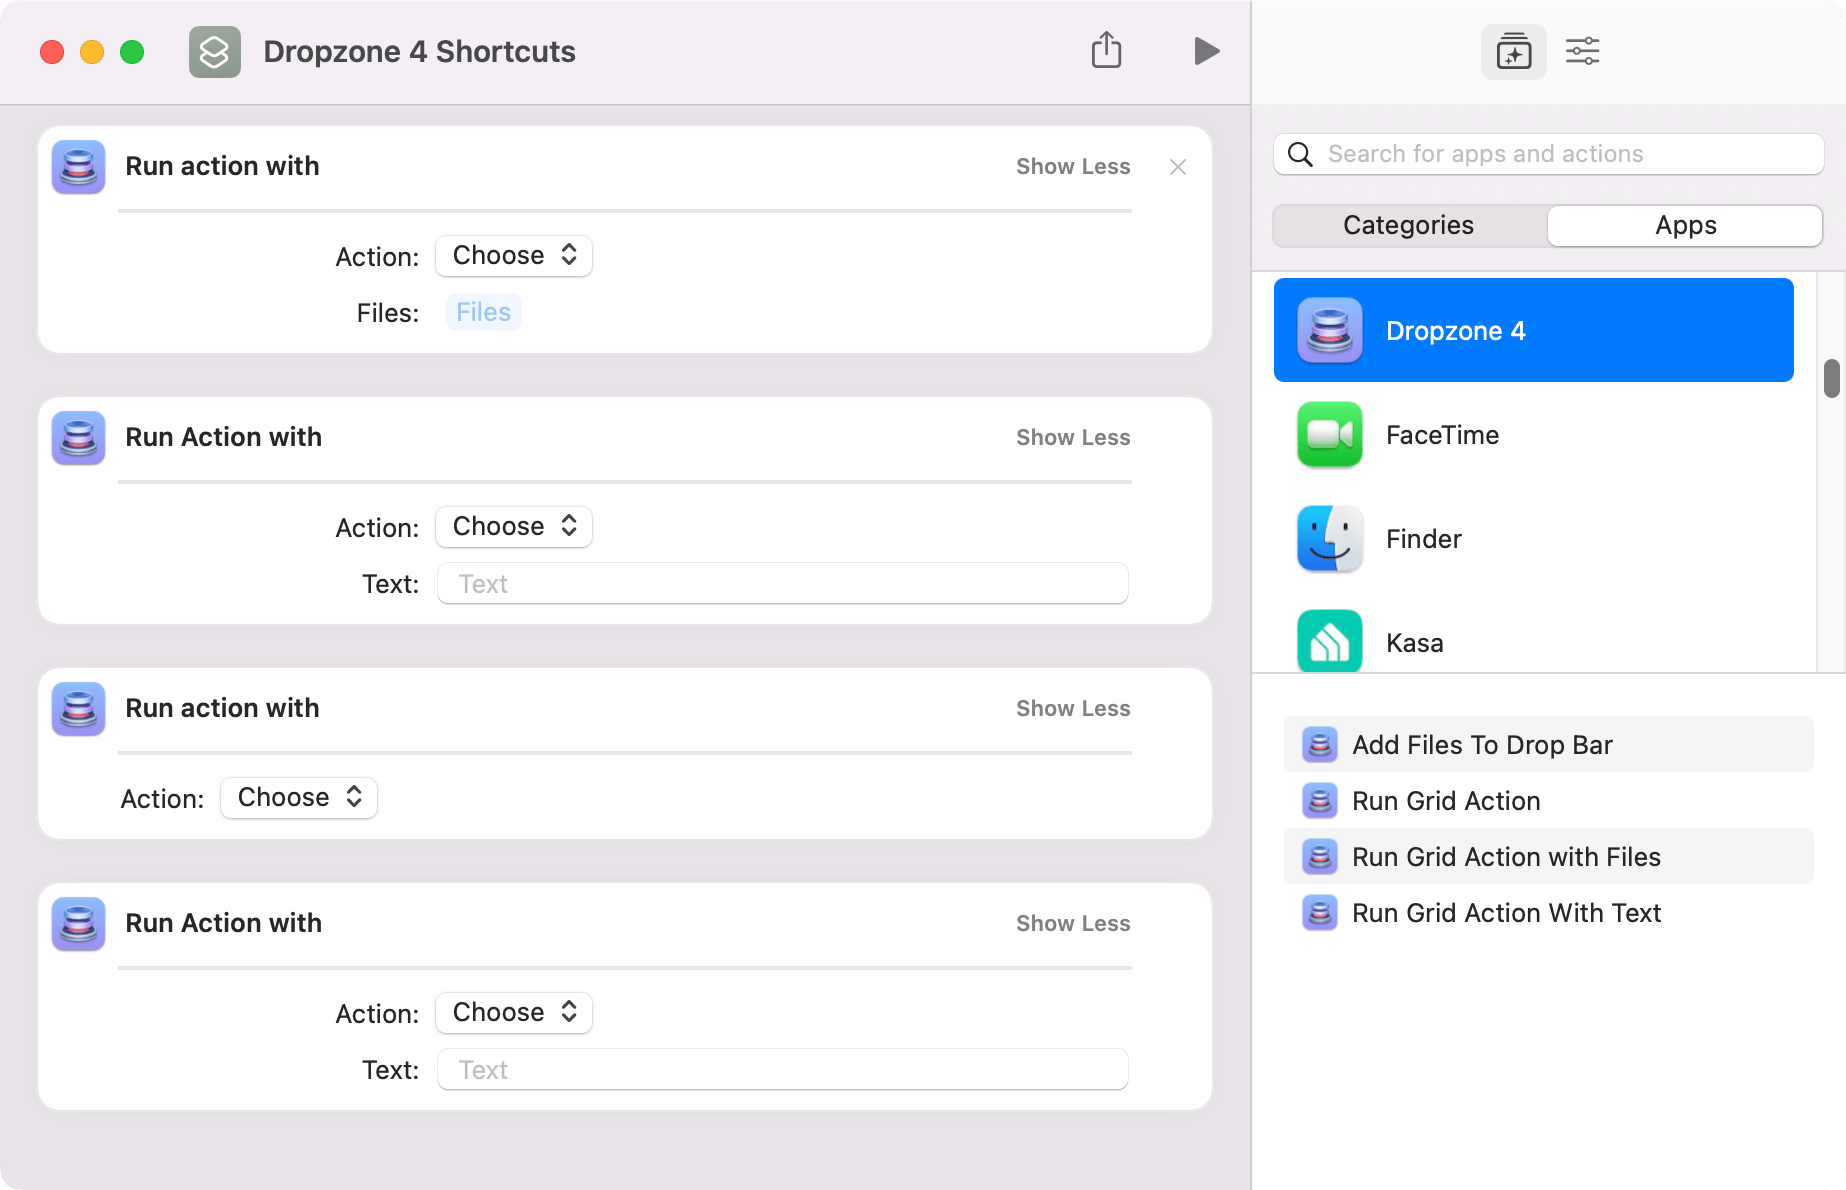 Dropzone 4 Available Shortcuts Screenshot